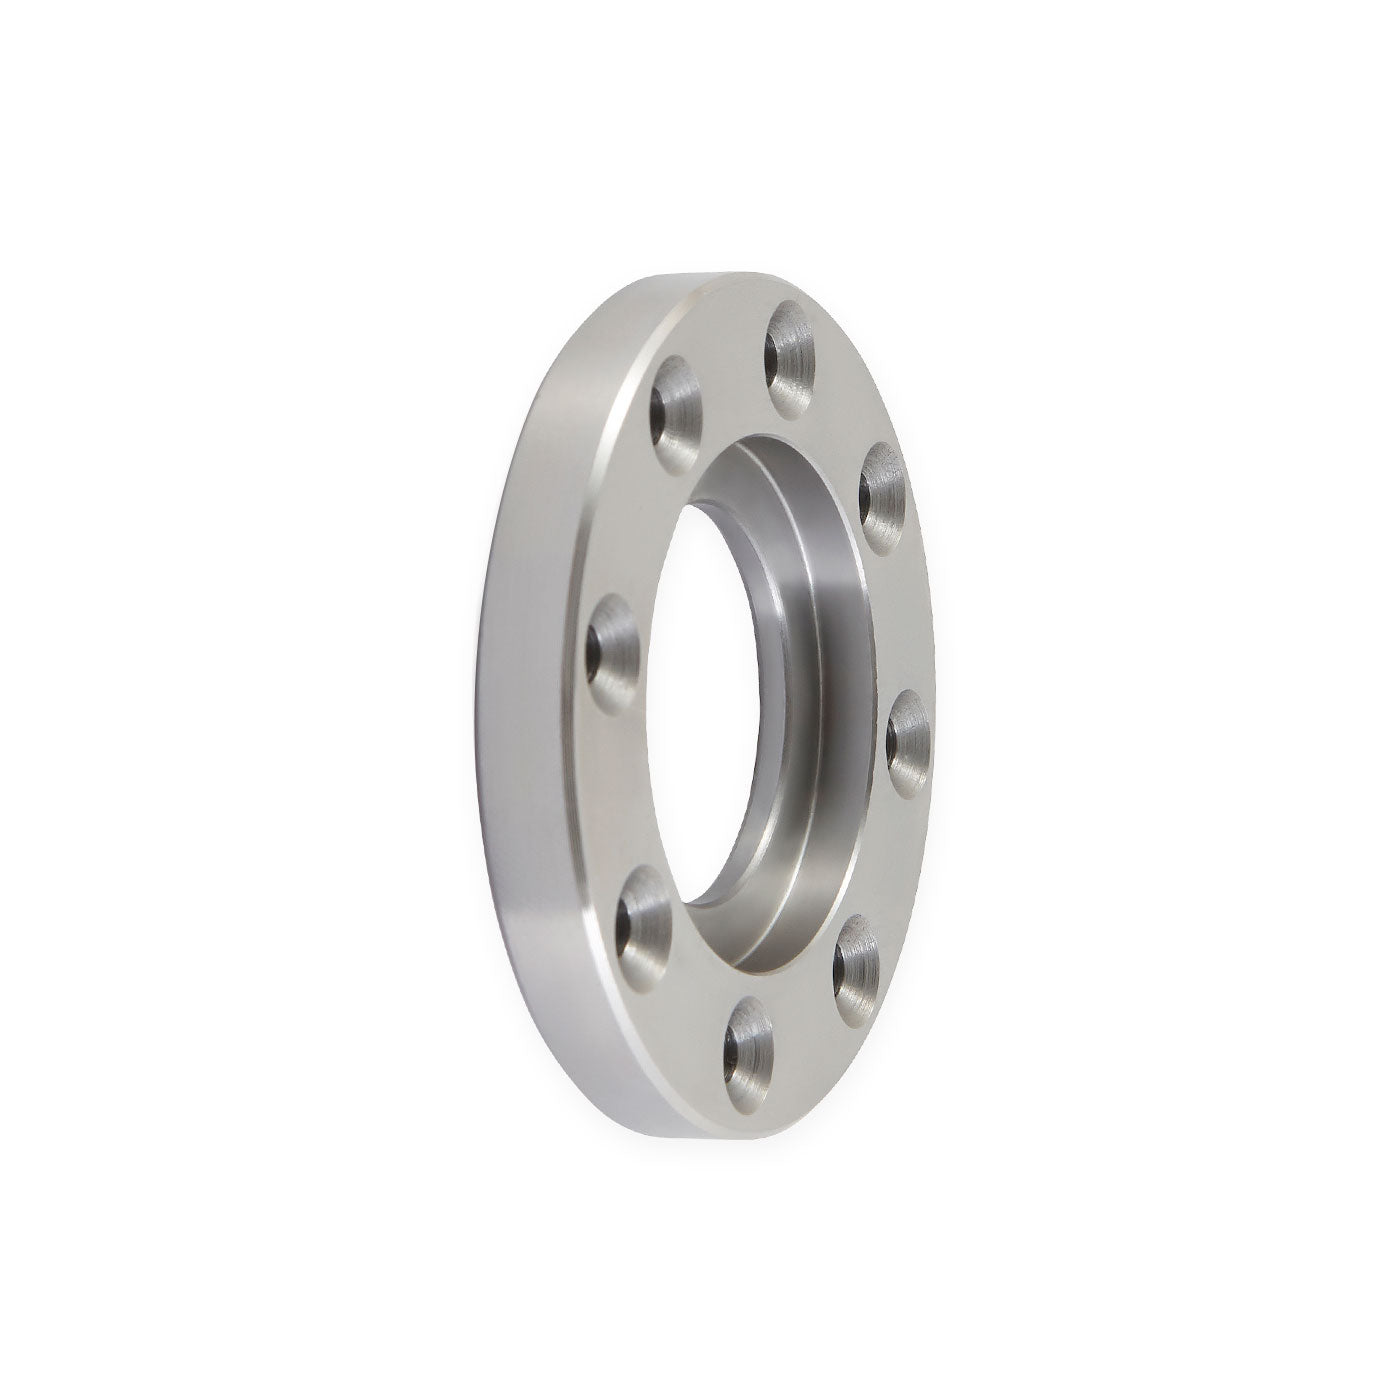 Faceplate Ring 65mm - Precision 75 Chuck